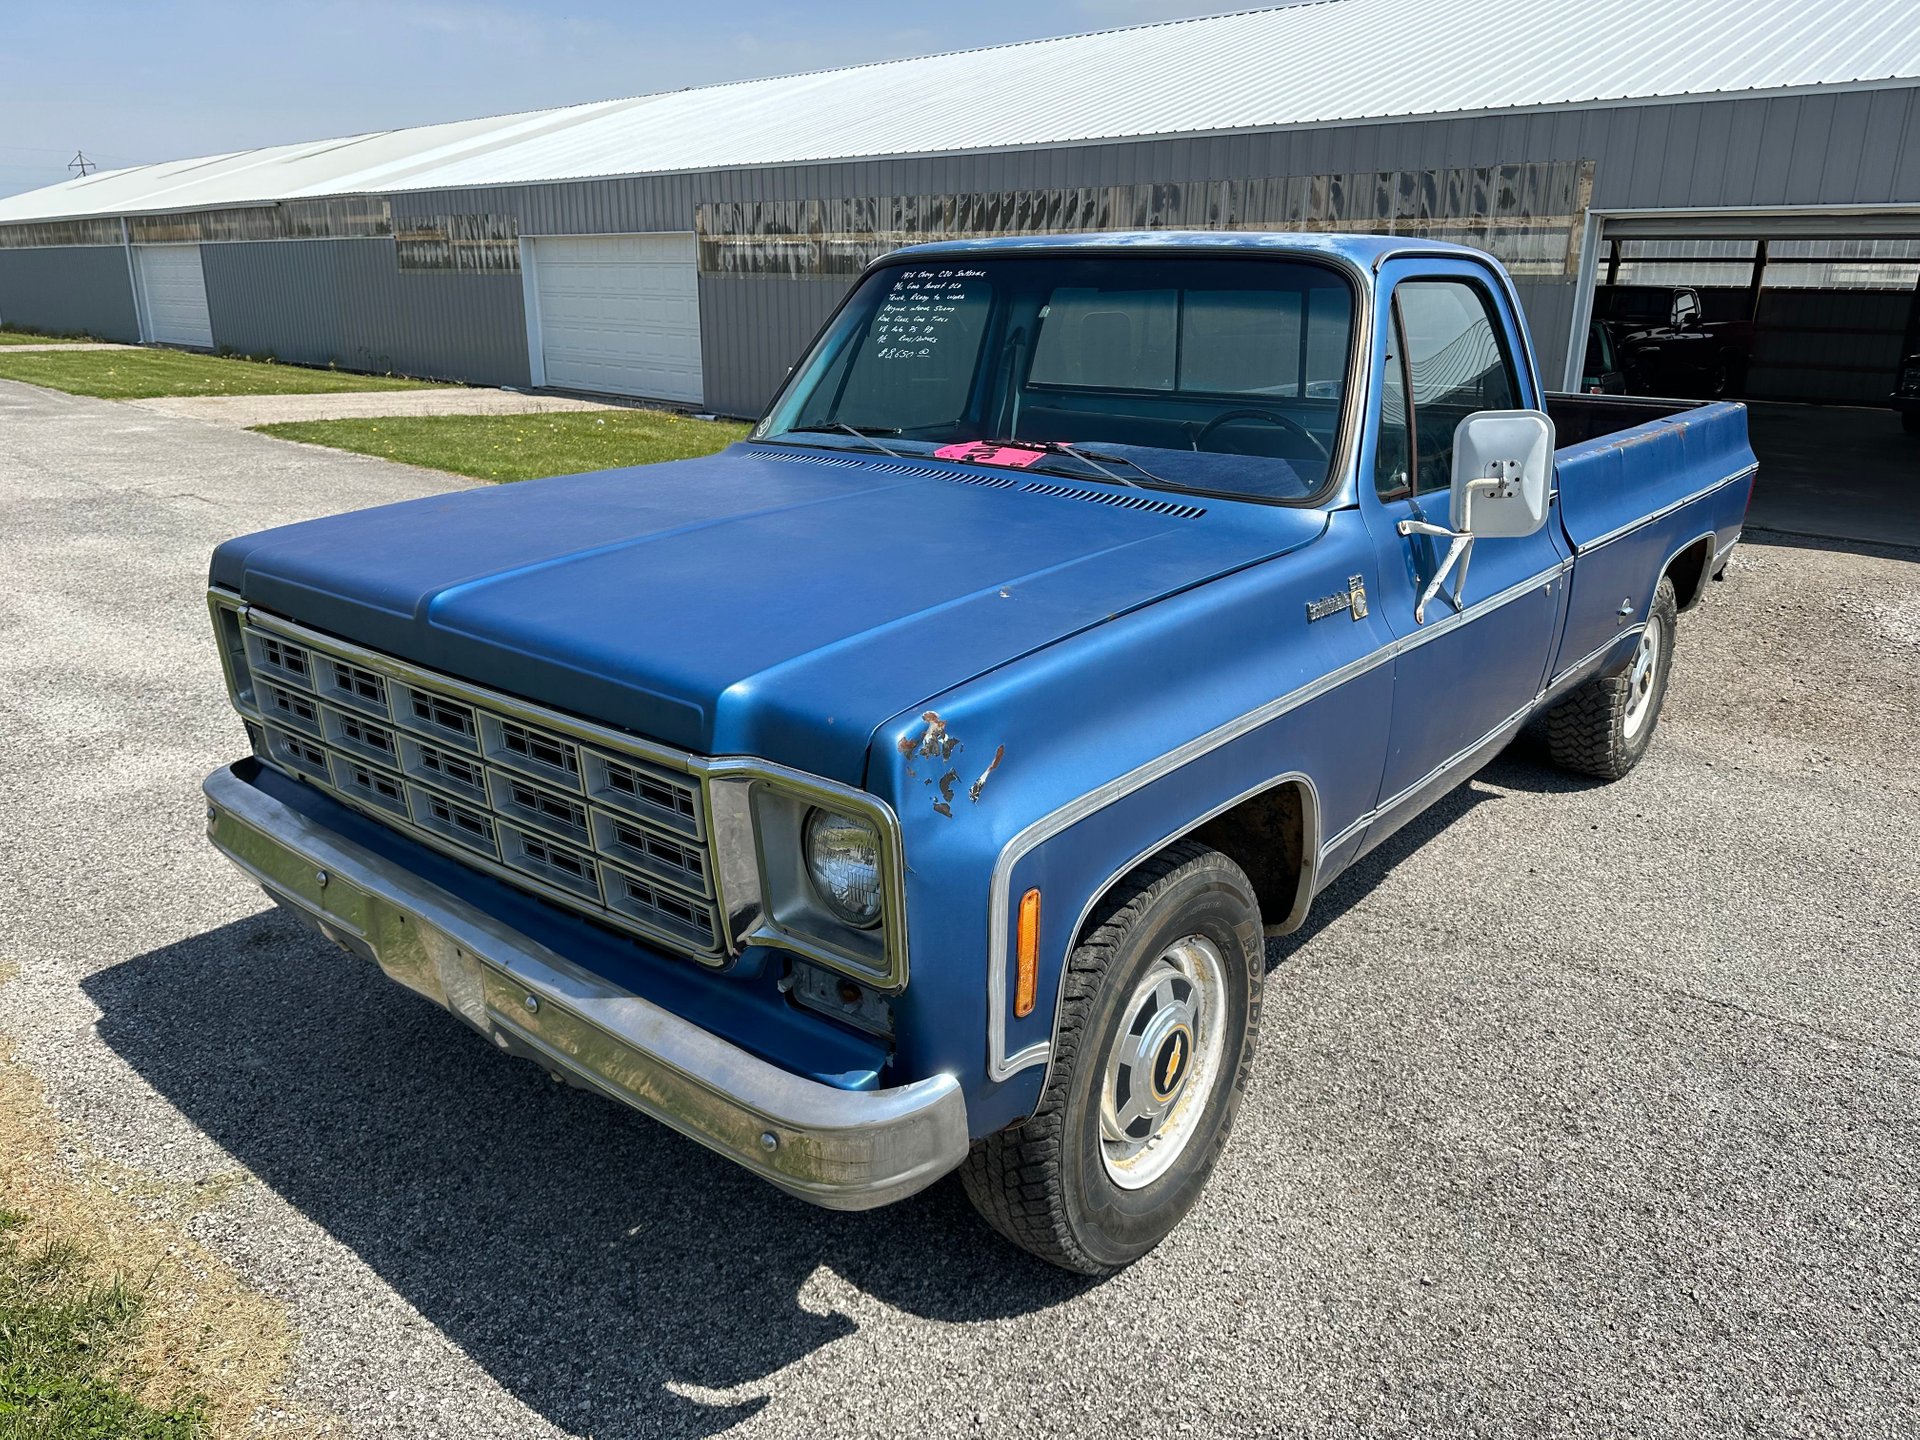 1976 Chevrolet C20 | Country Classic Cars